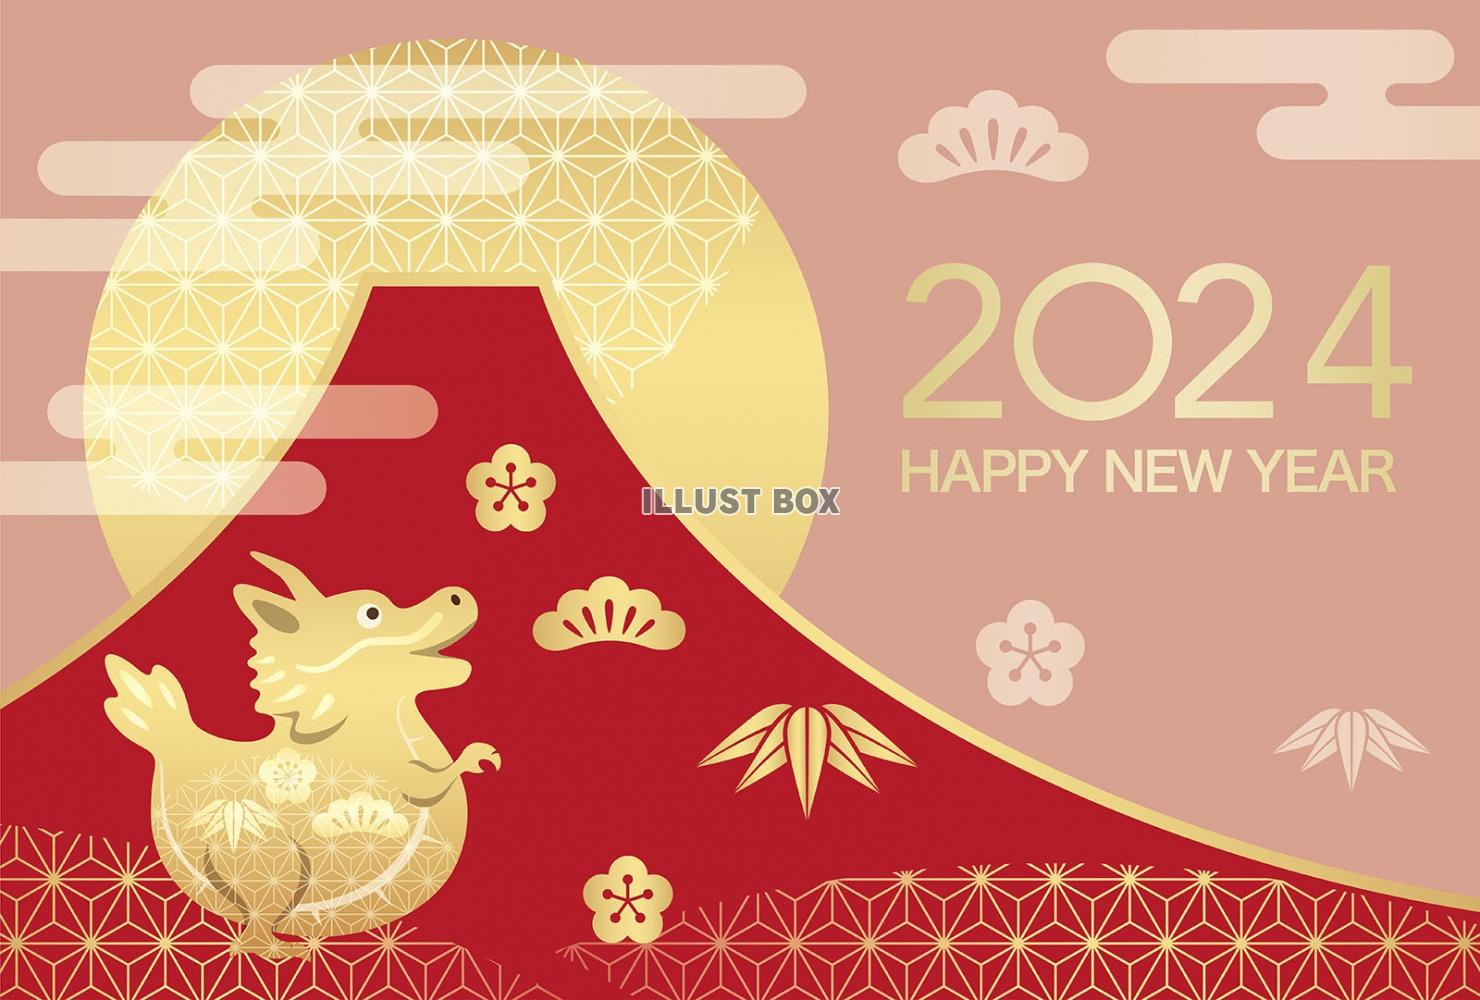 Year Of The Dragon 2024 Japan Image to u